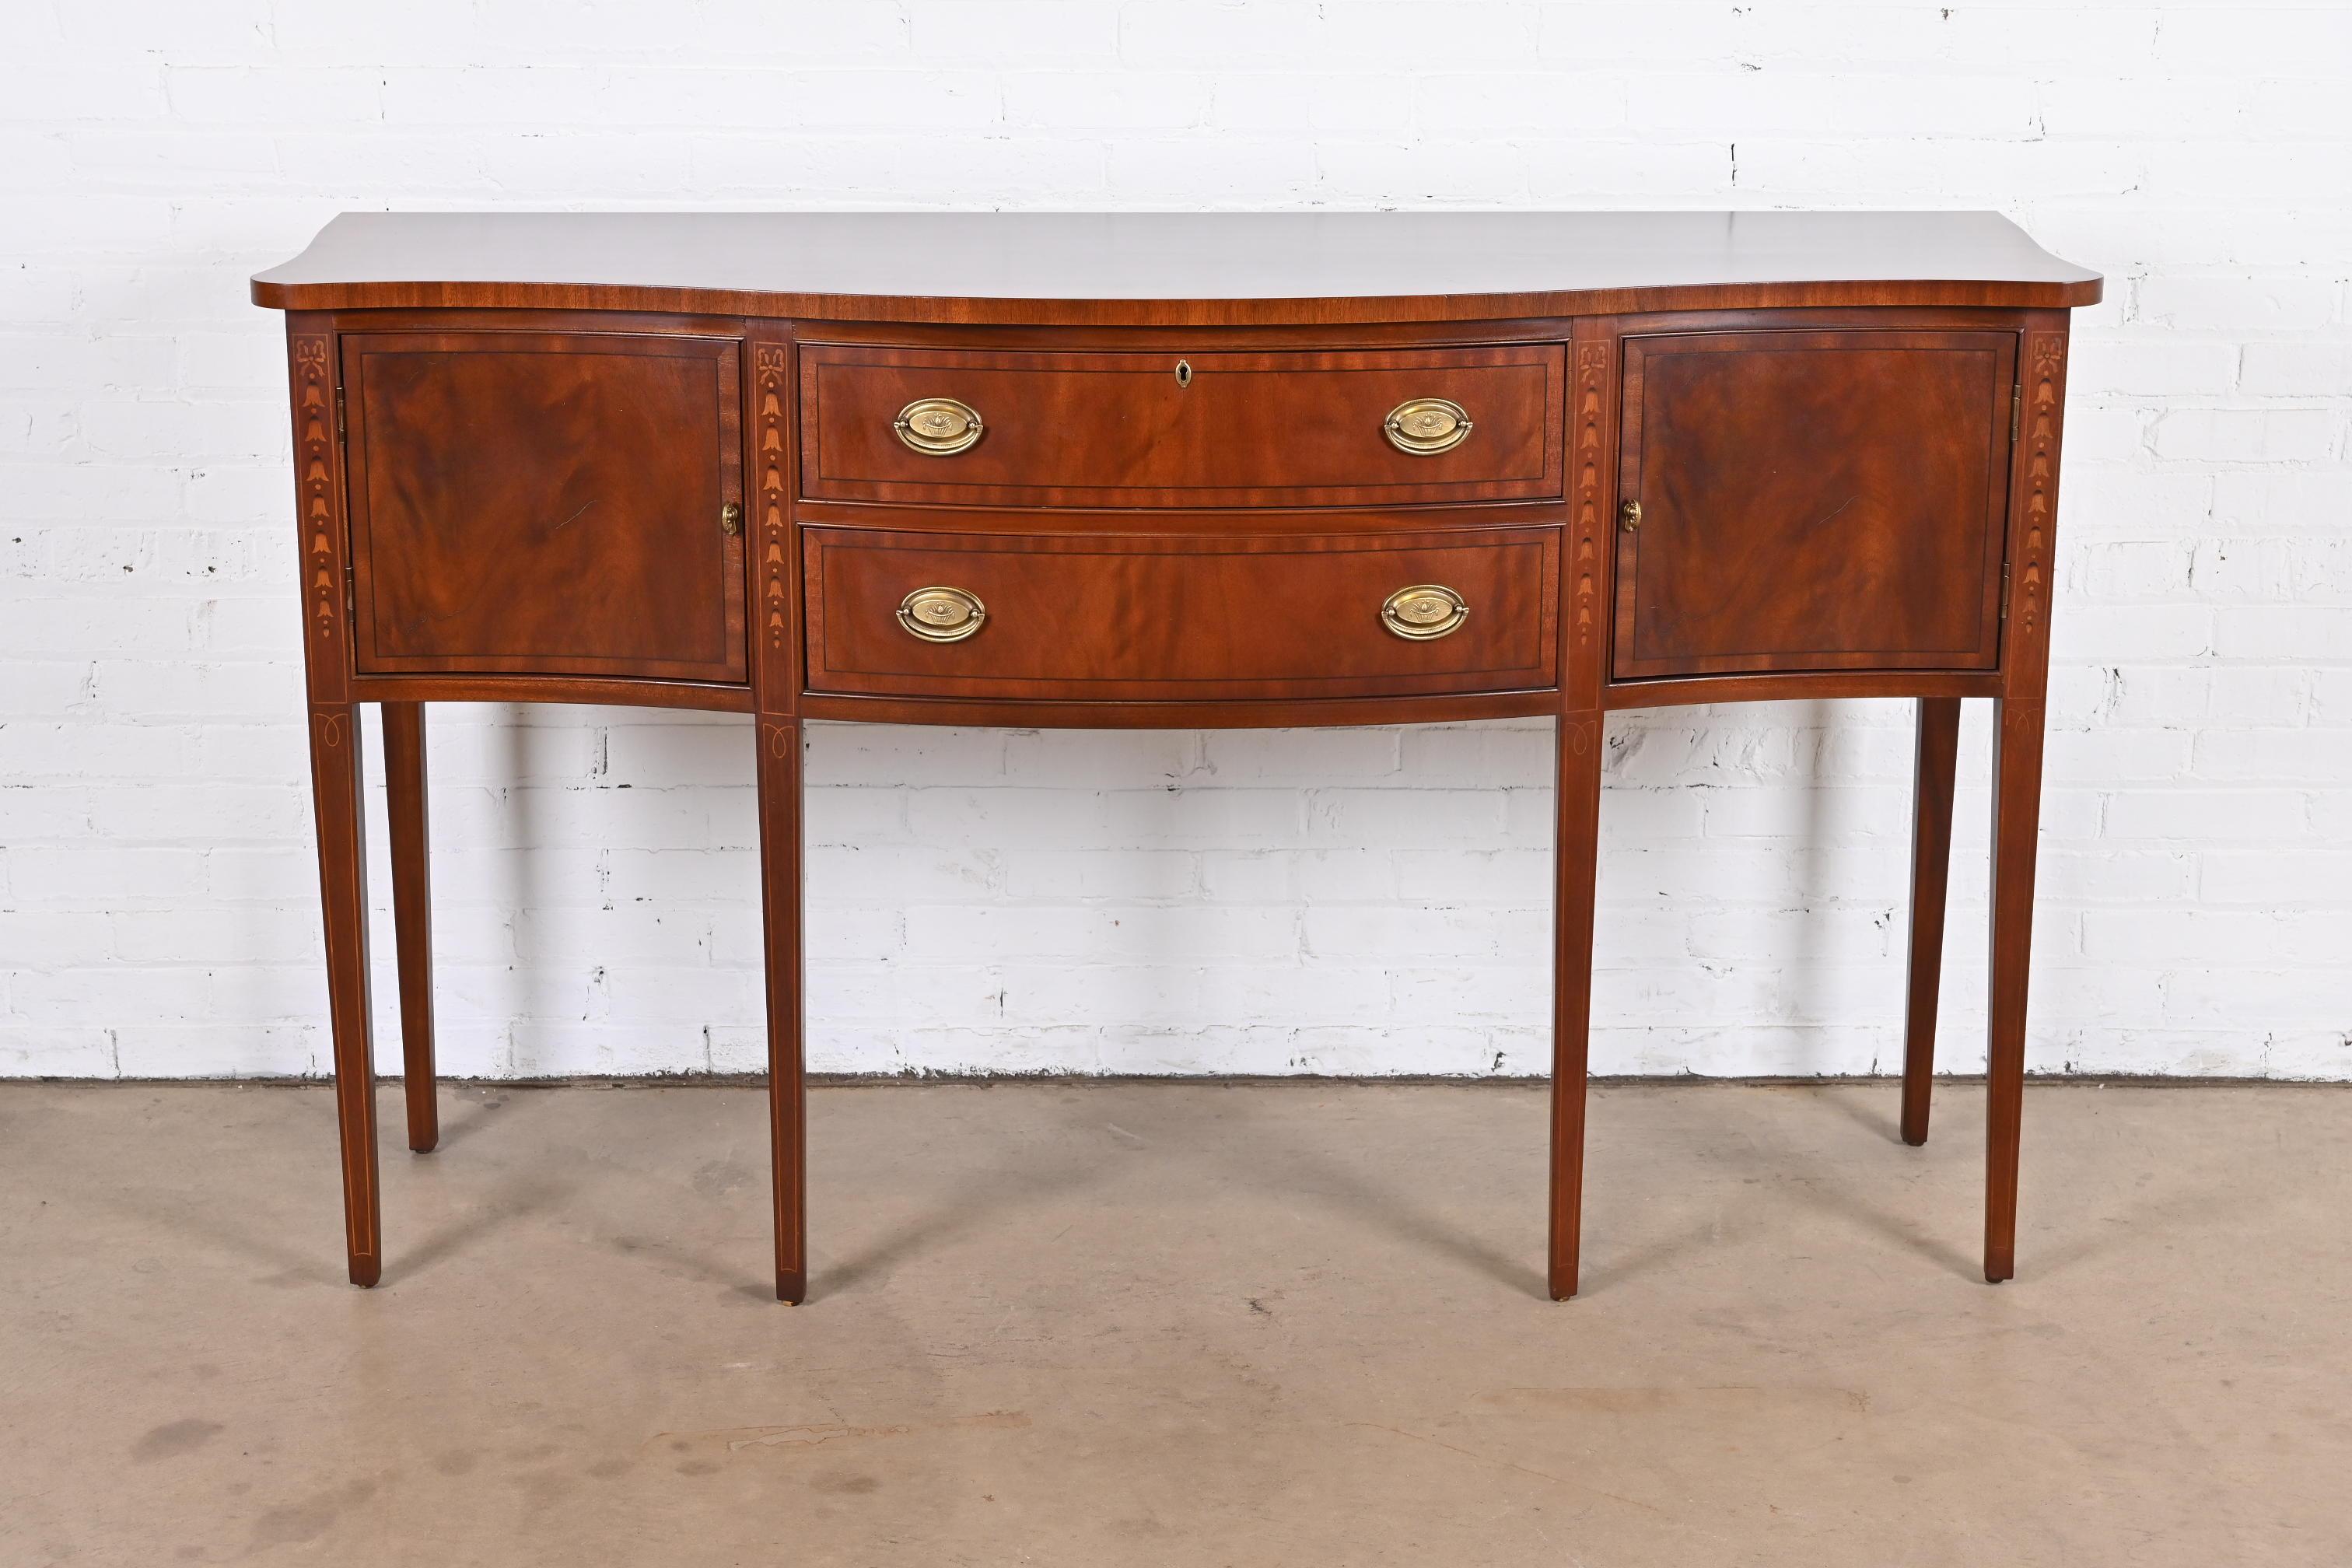 A gorgeous Federal or Hepplewhite style serpentine front sideboard, buffet, or credenza

By Ethan Allen

USA, late 20th century

Flame mahogany, with inlaid satinwood marquetry, and original brass hardware.

Measures: 65.5